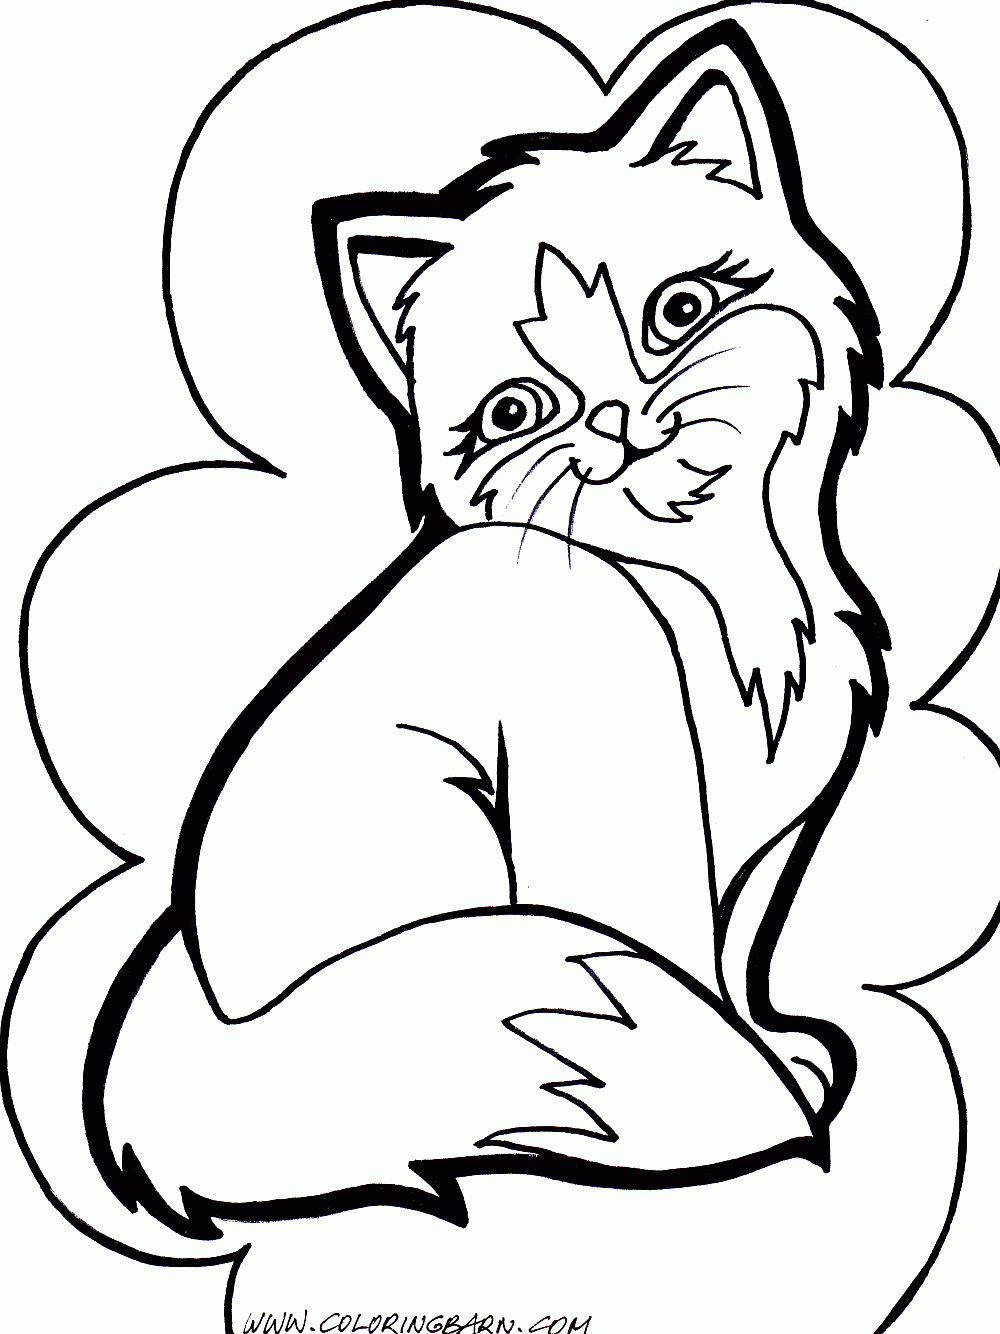 Free Cat And Kitten Coloring Page, Download Free Cat And Kitten